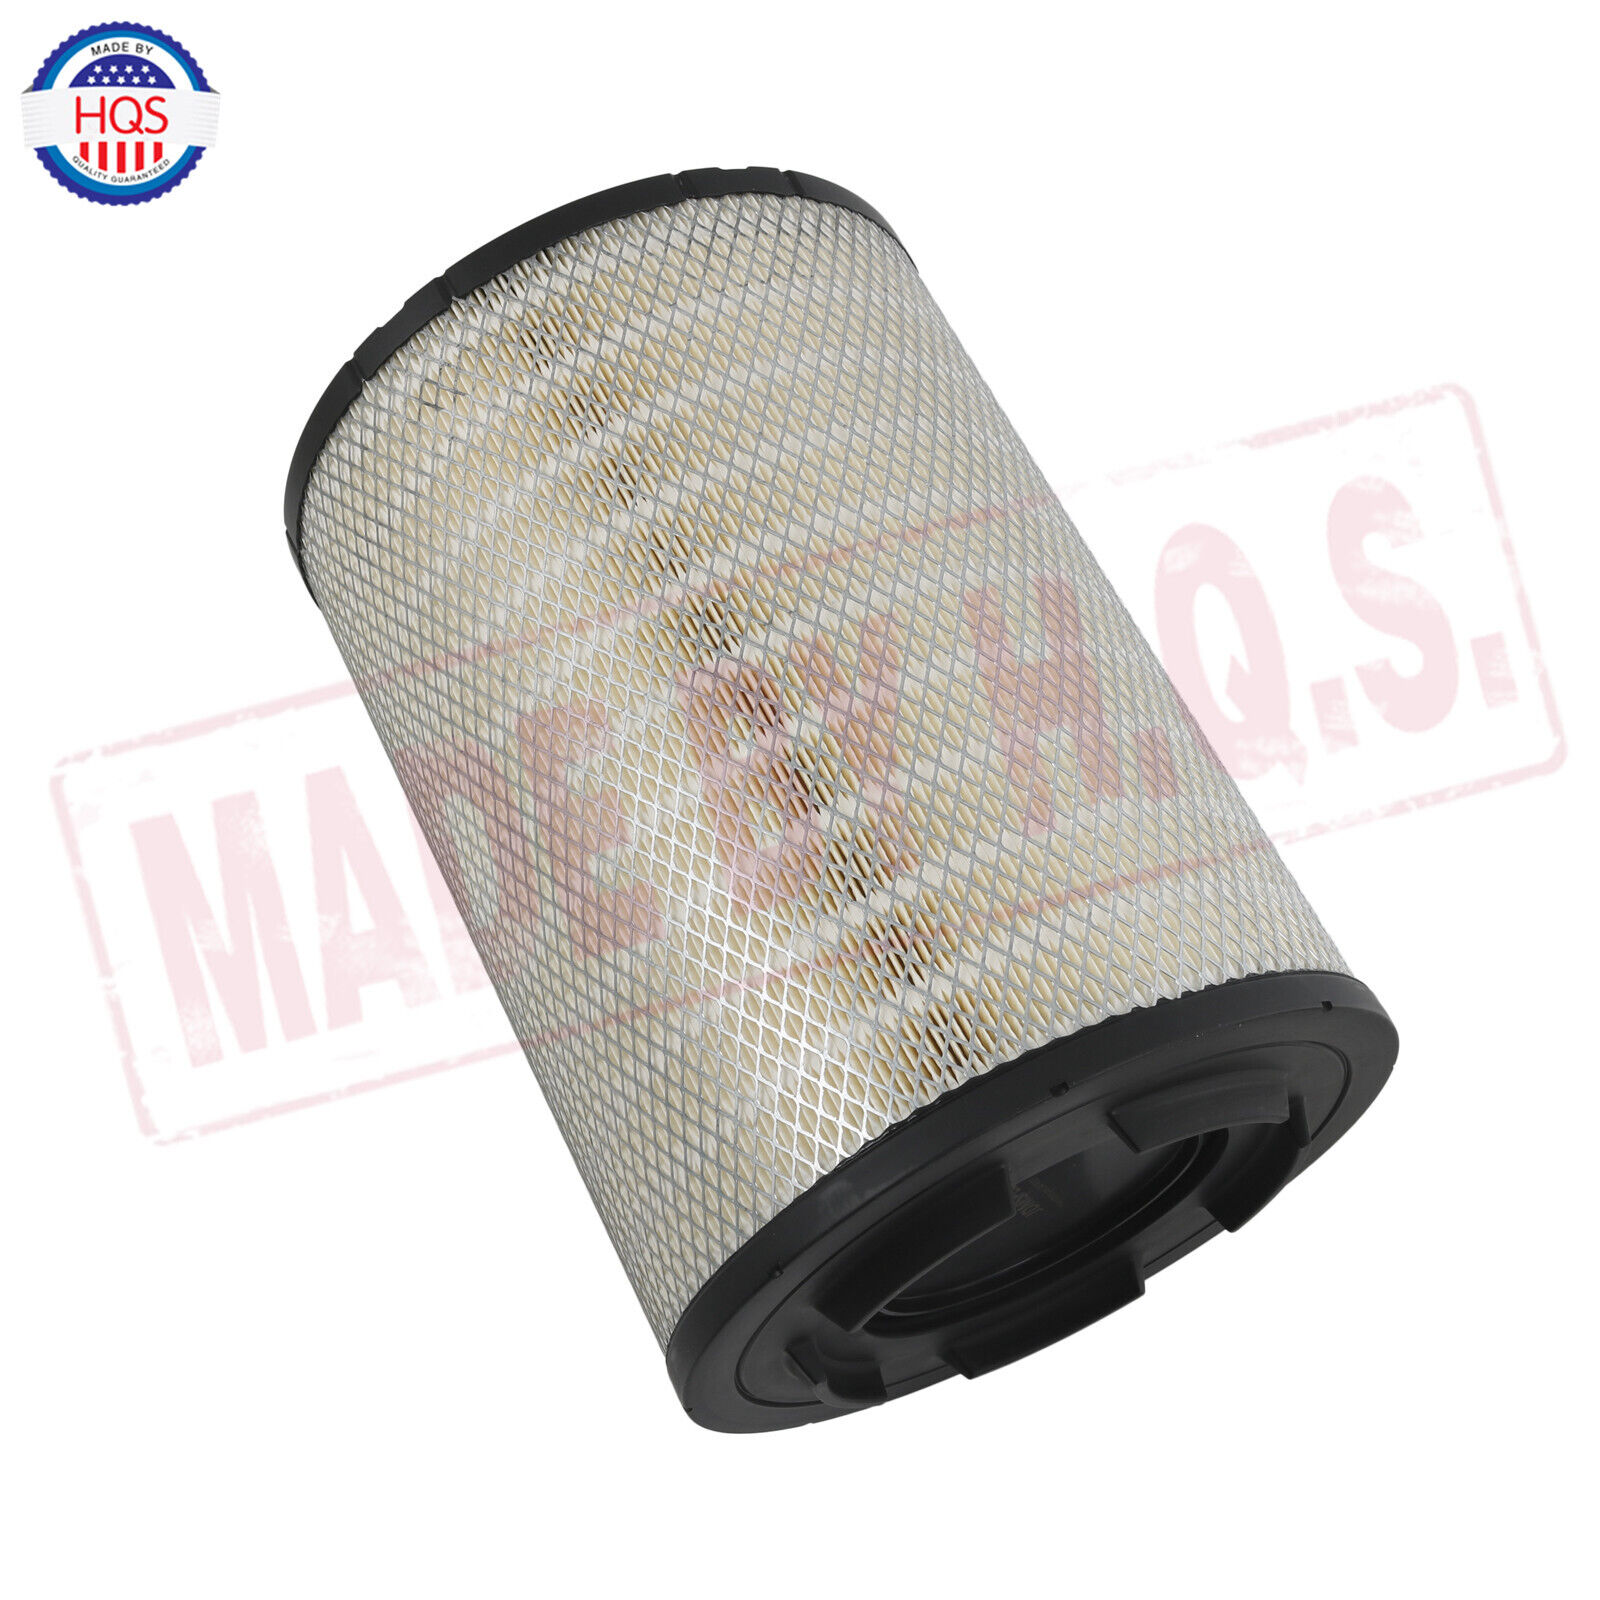 Engine Air Filter For VNL VNM Trucks Replaces 21715813, Rs4642, P606720, Laf9201